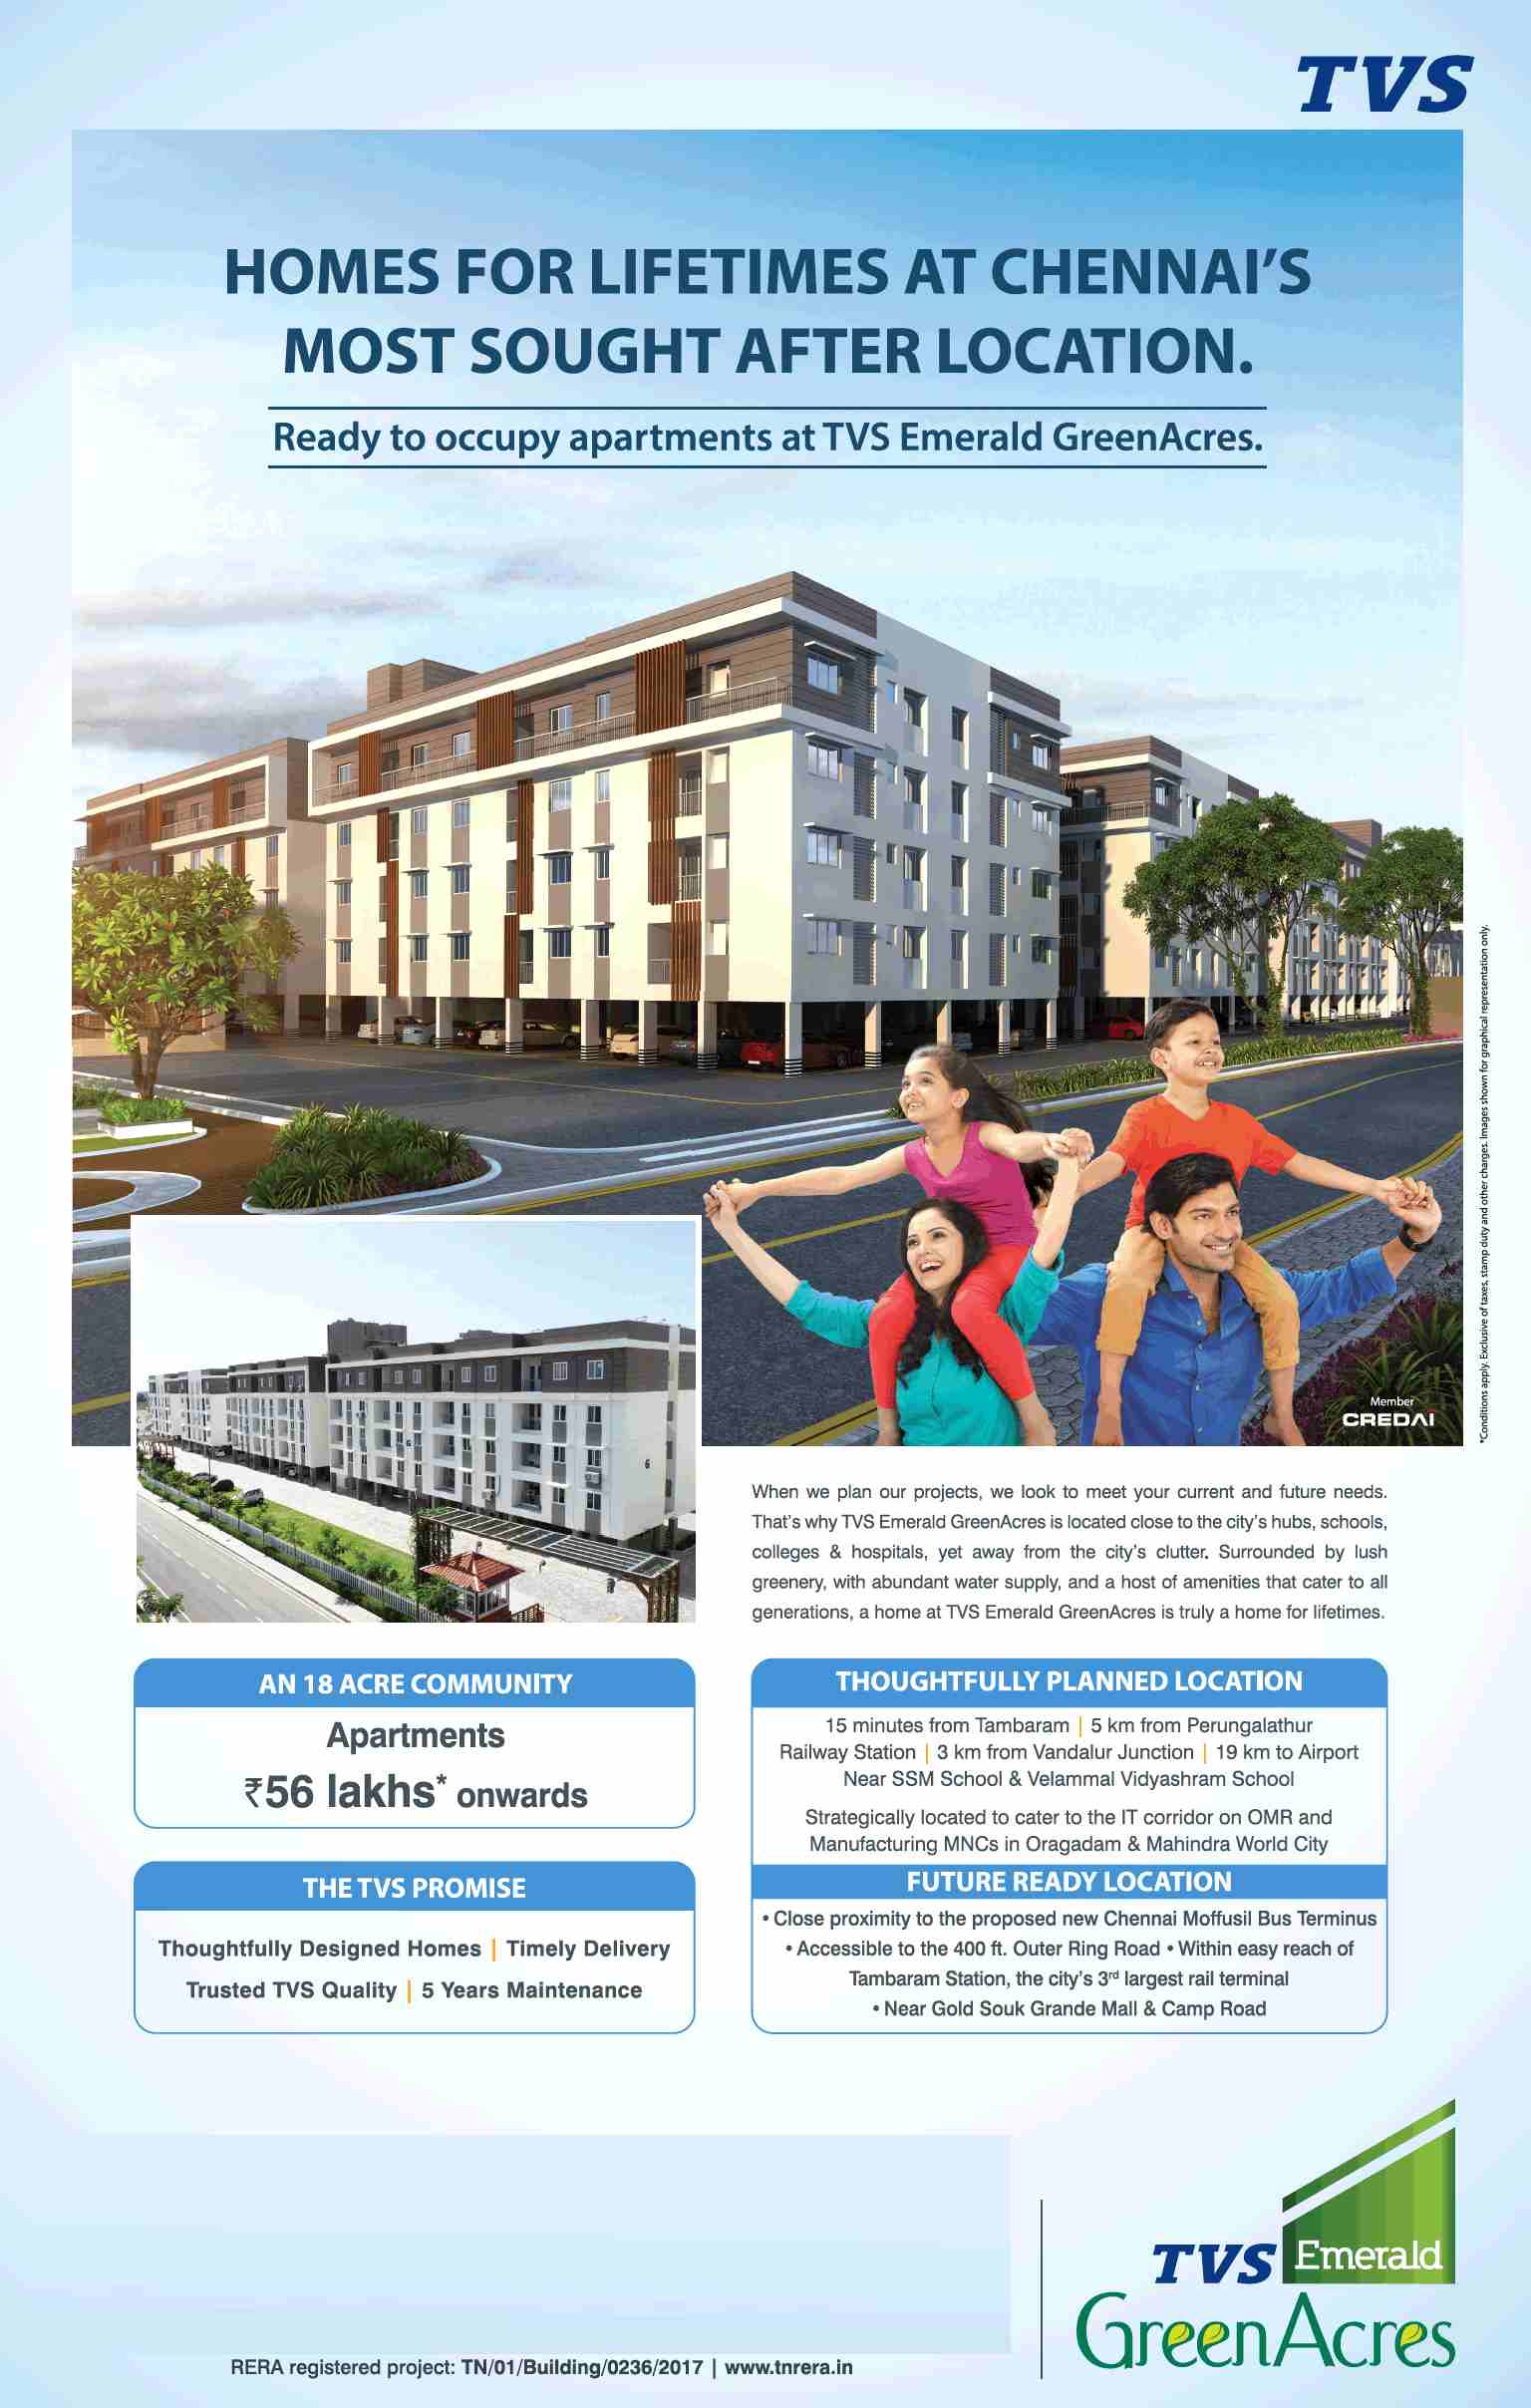 Book ready to move apartments @ Rs 56 lakhs at TVS Emerald Green Acres in Chennai